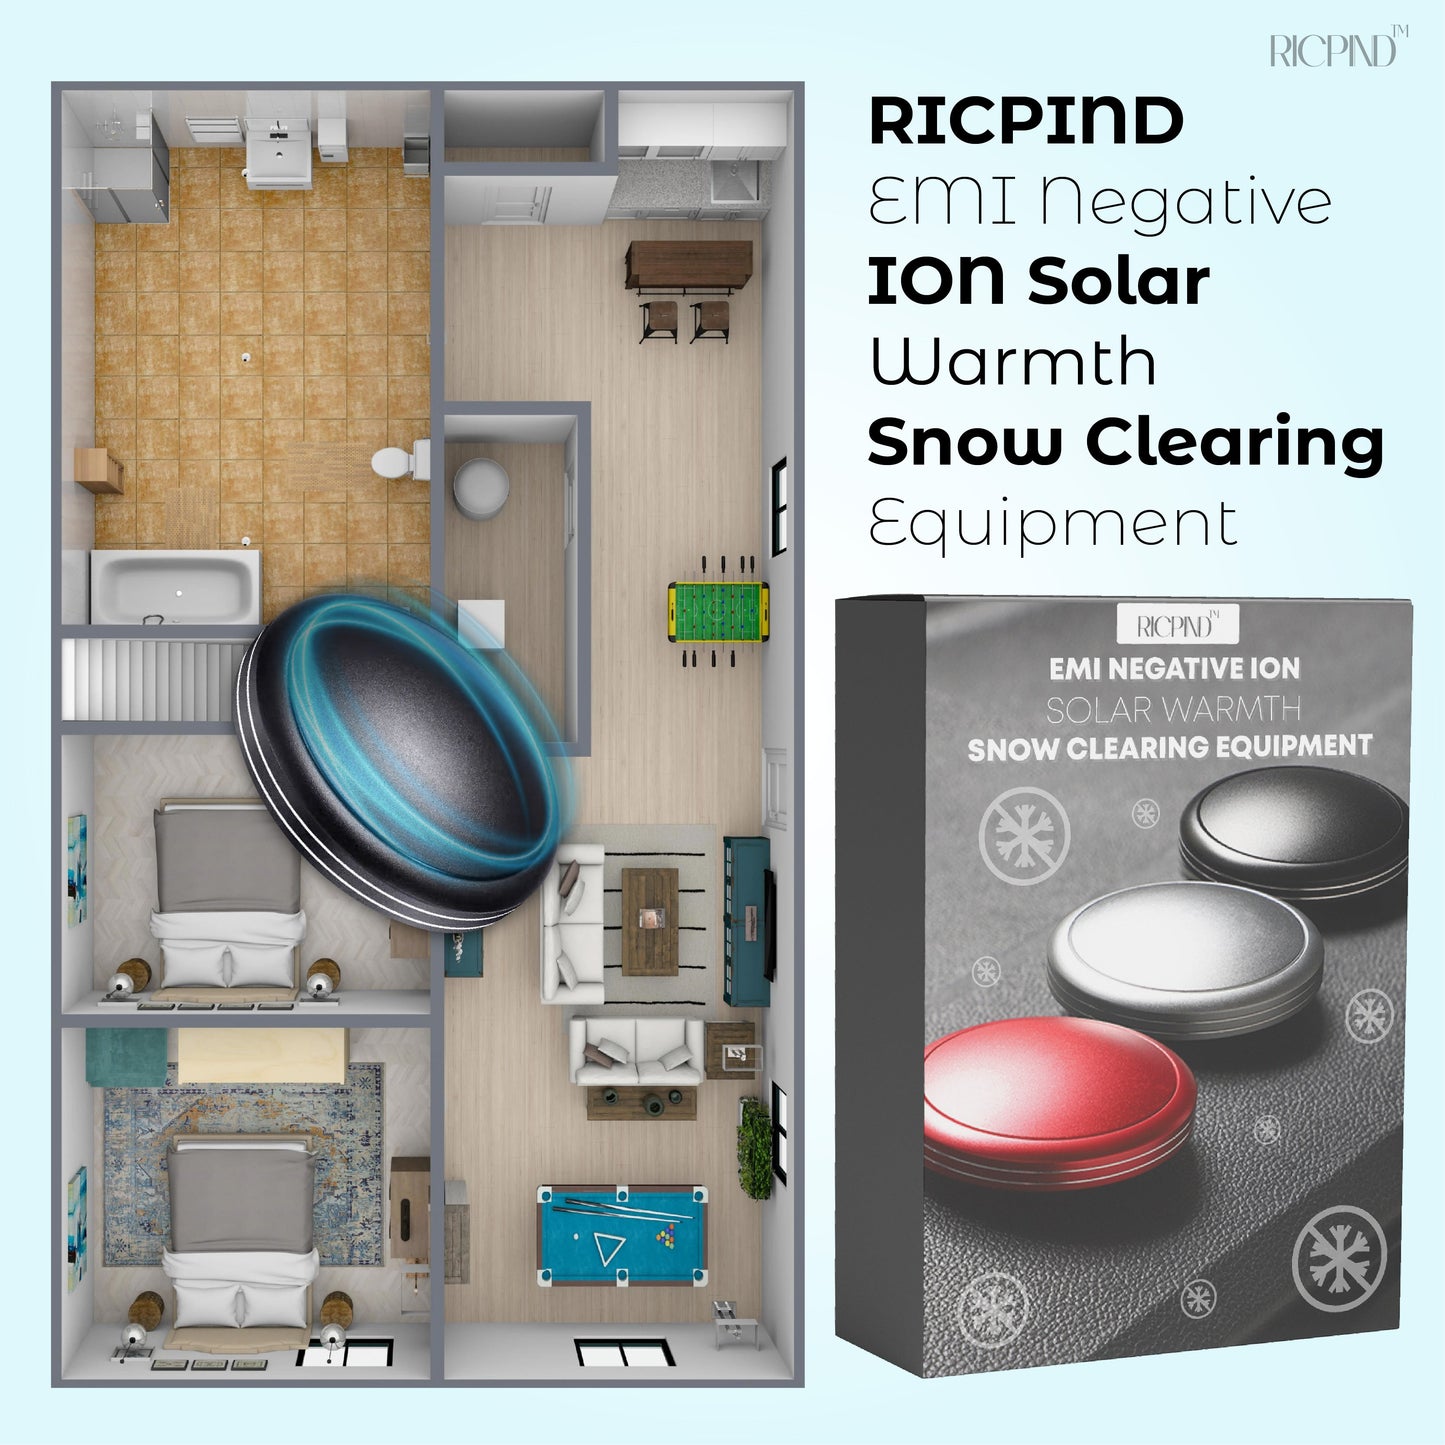 RICPIND EMI Negative ION Solar Warmth Snow Clearing Equipment